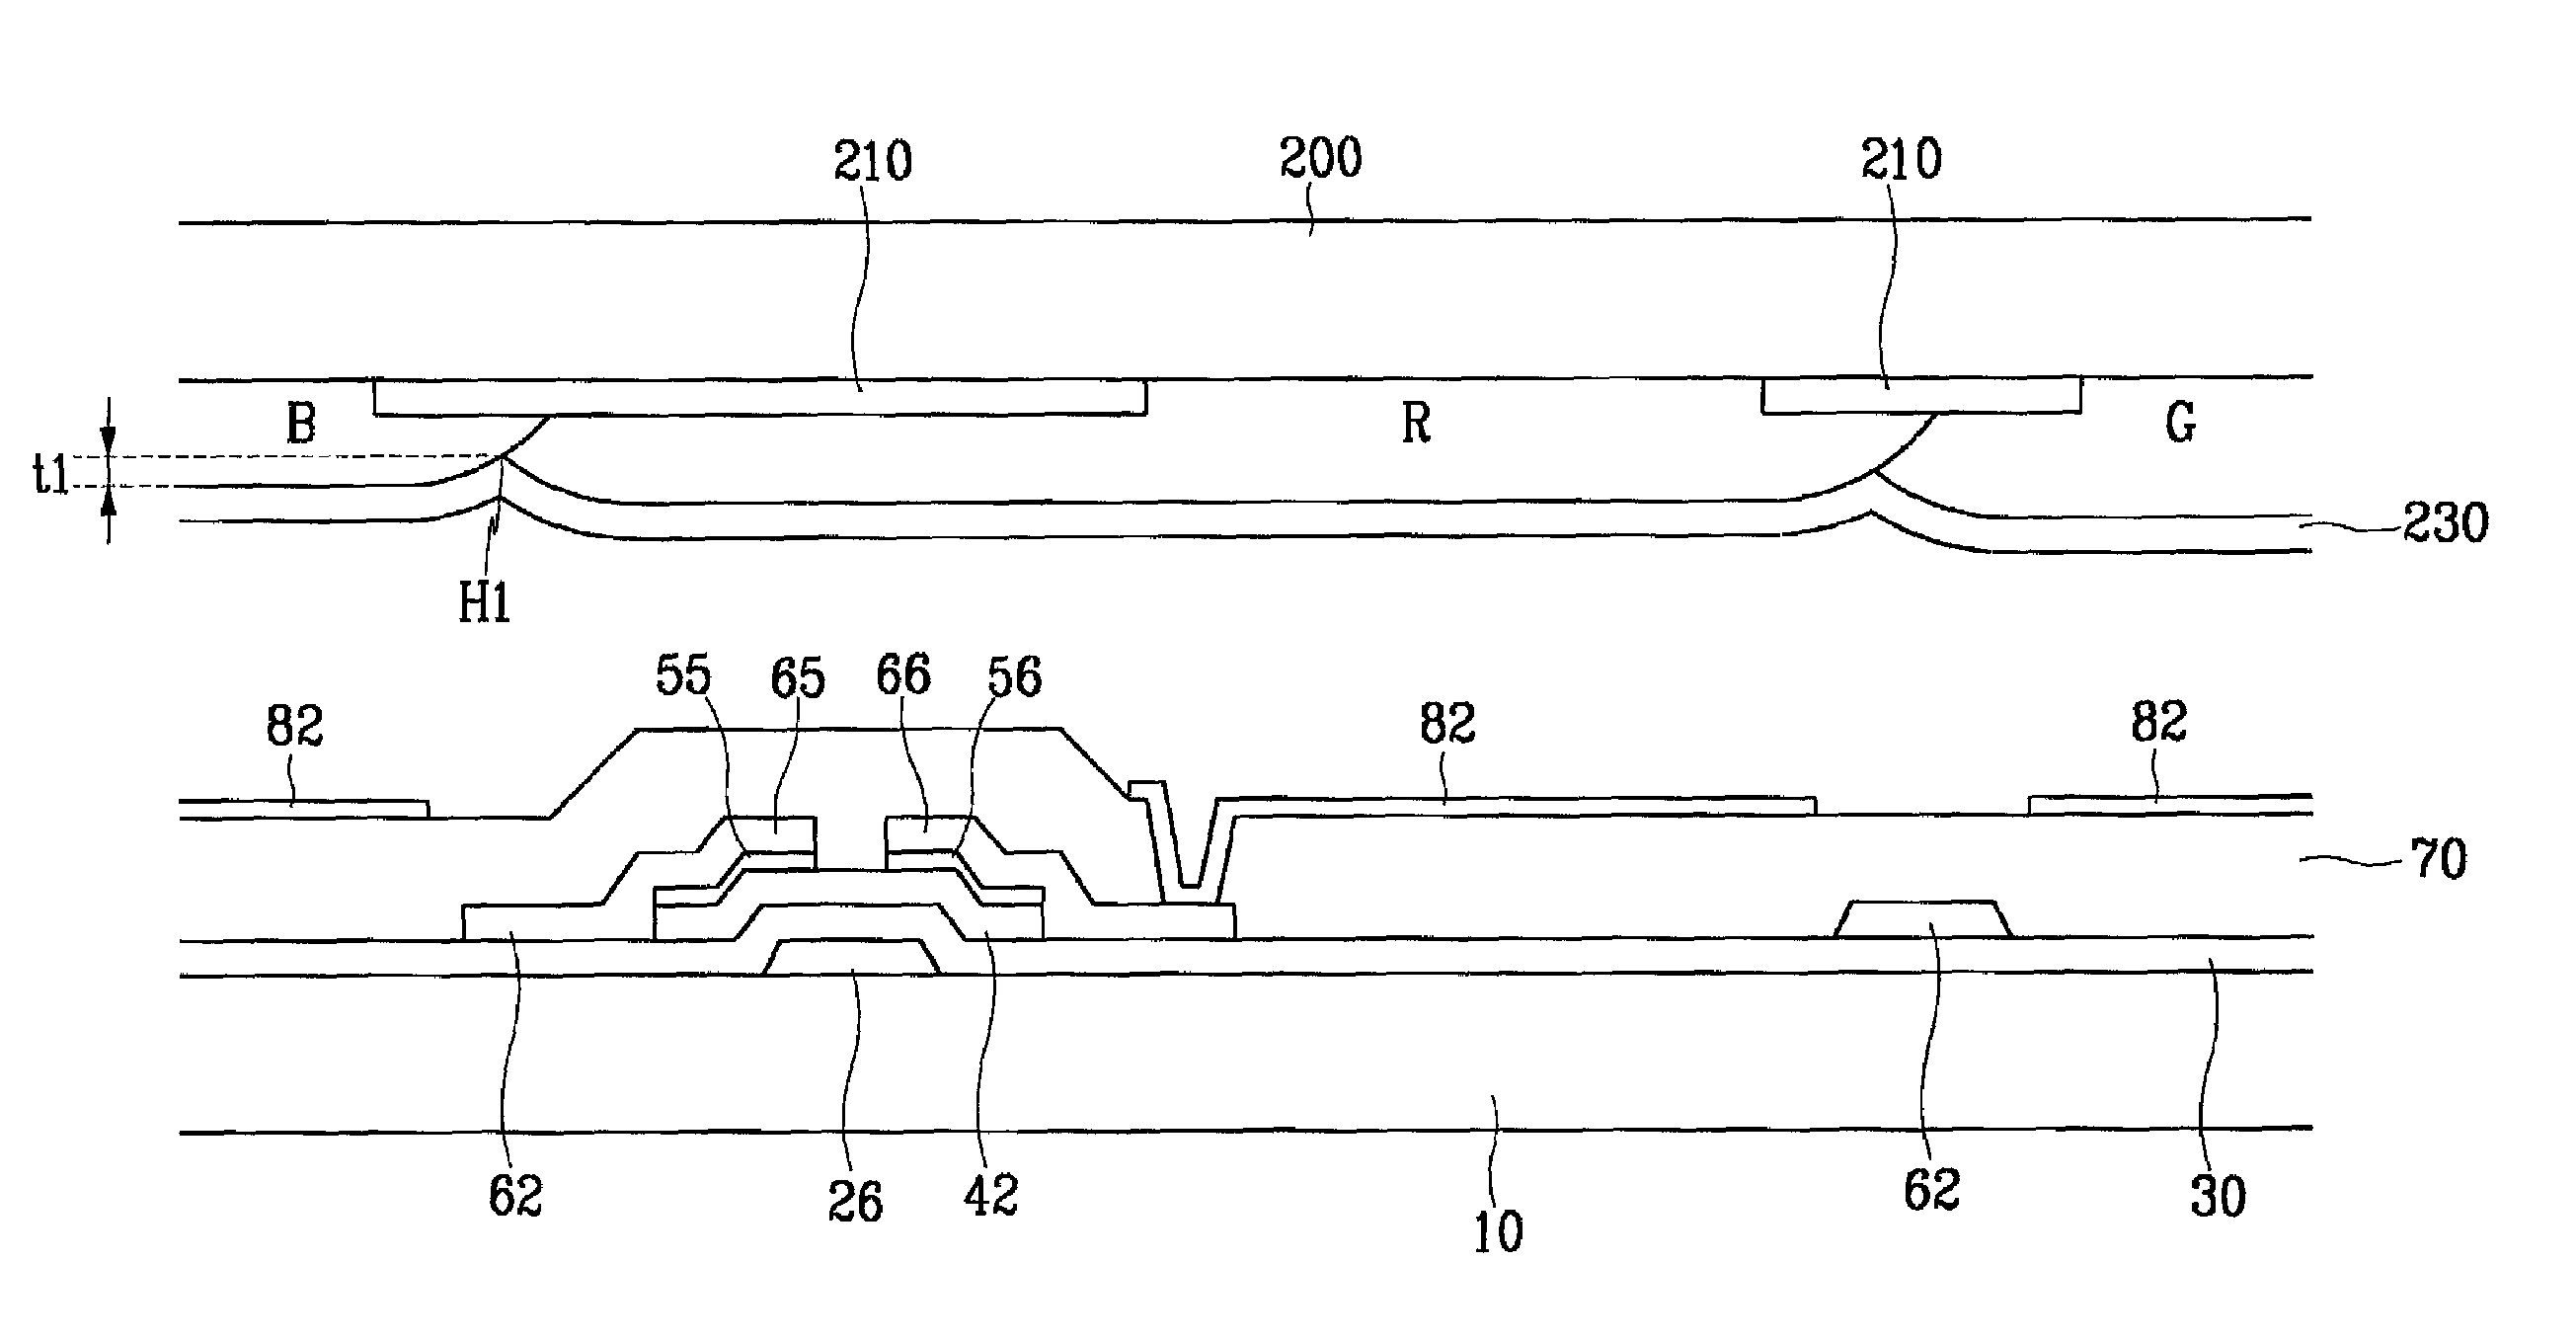 Color filter plate and thin film transistor plate for liquid crystal display, and methods for fabricating the plates